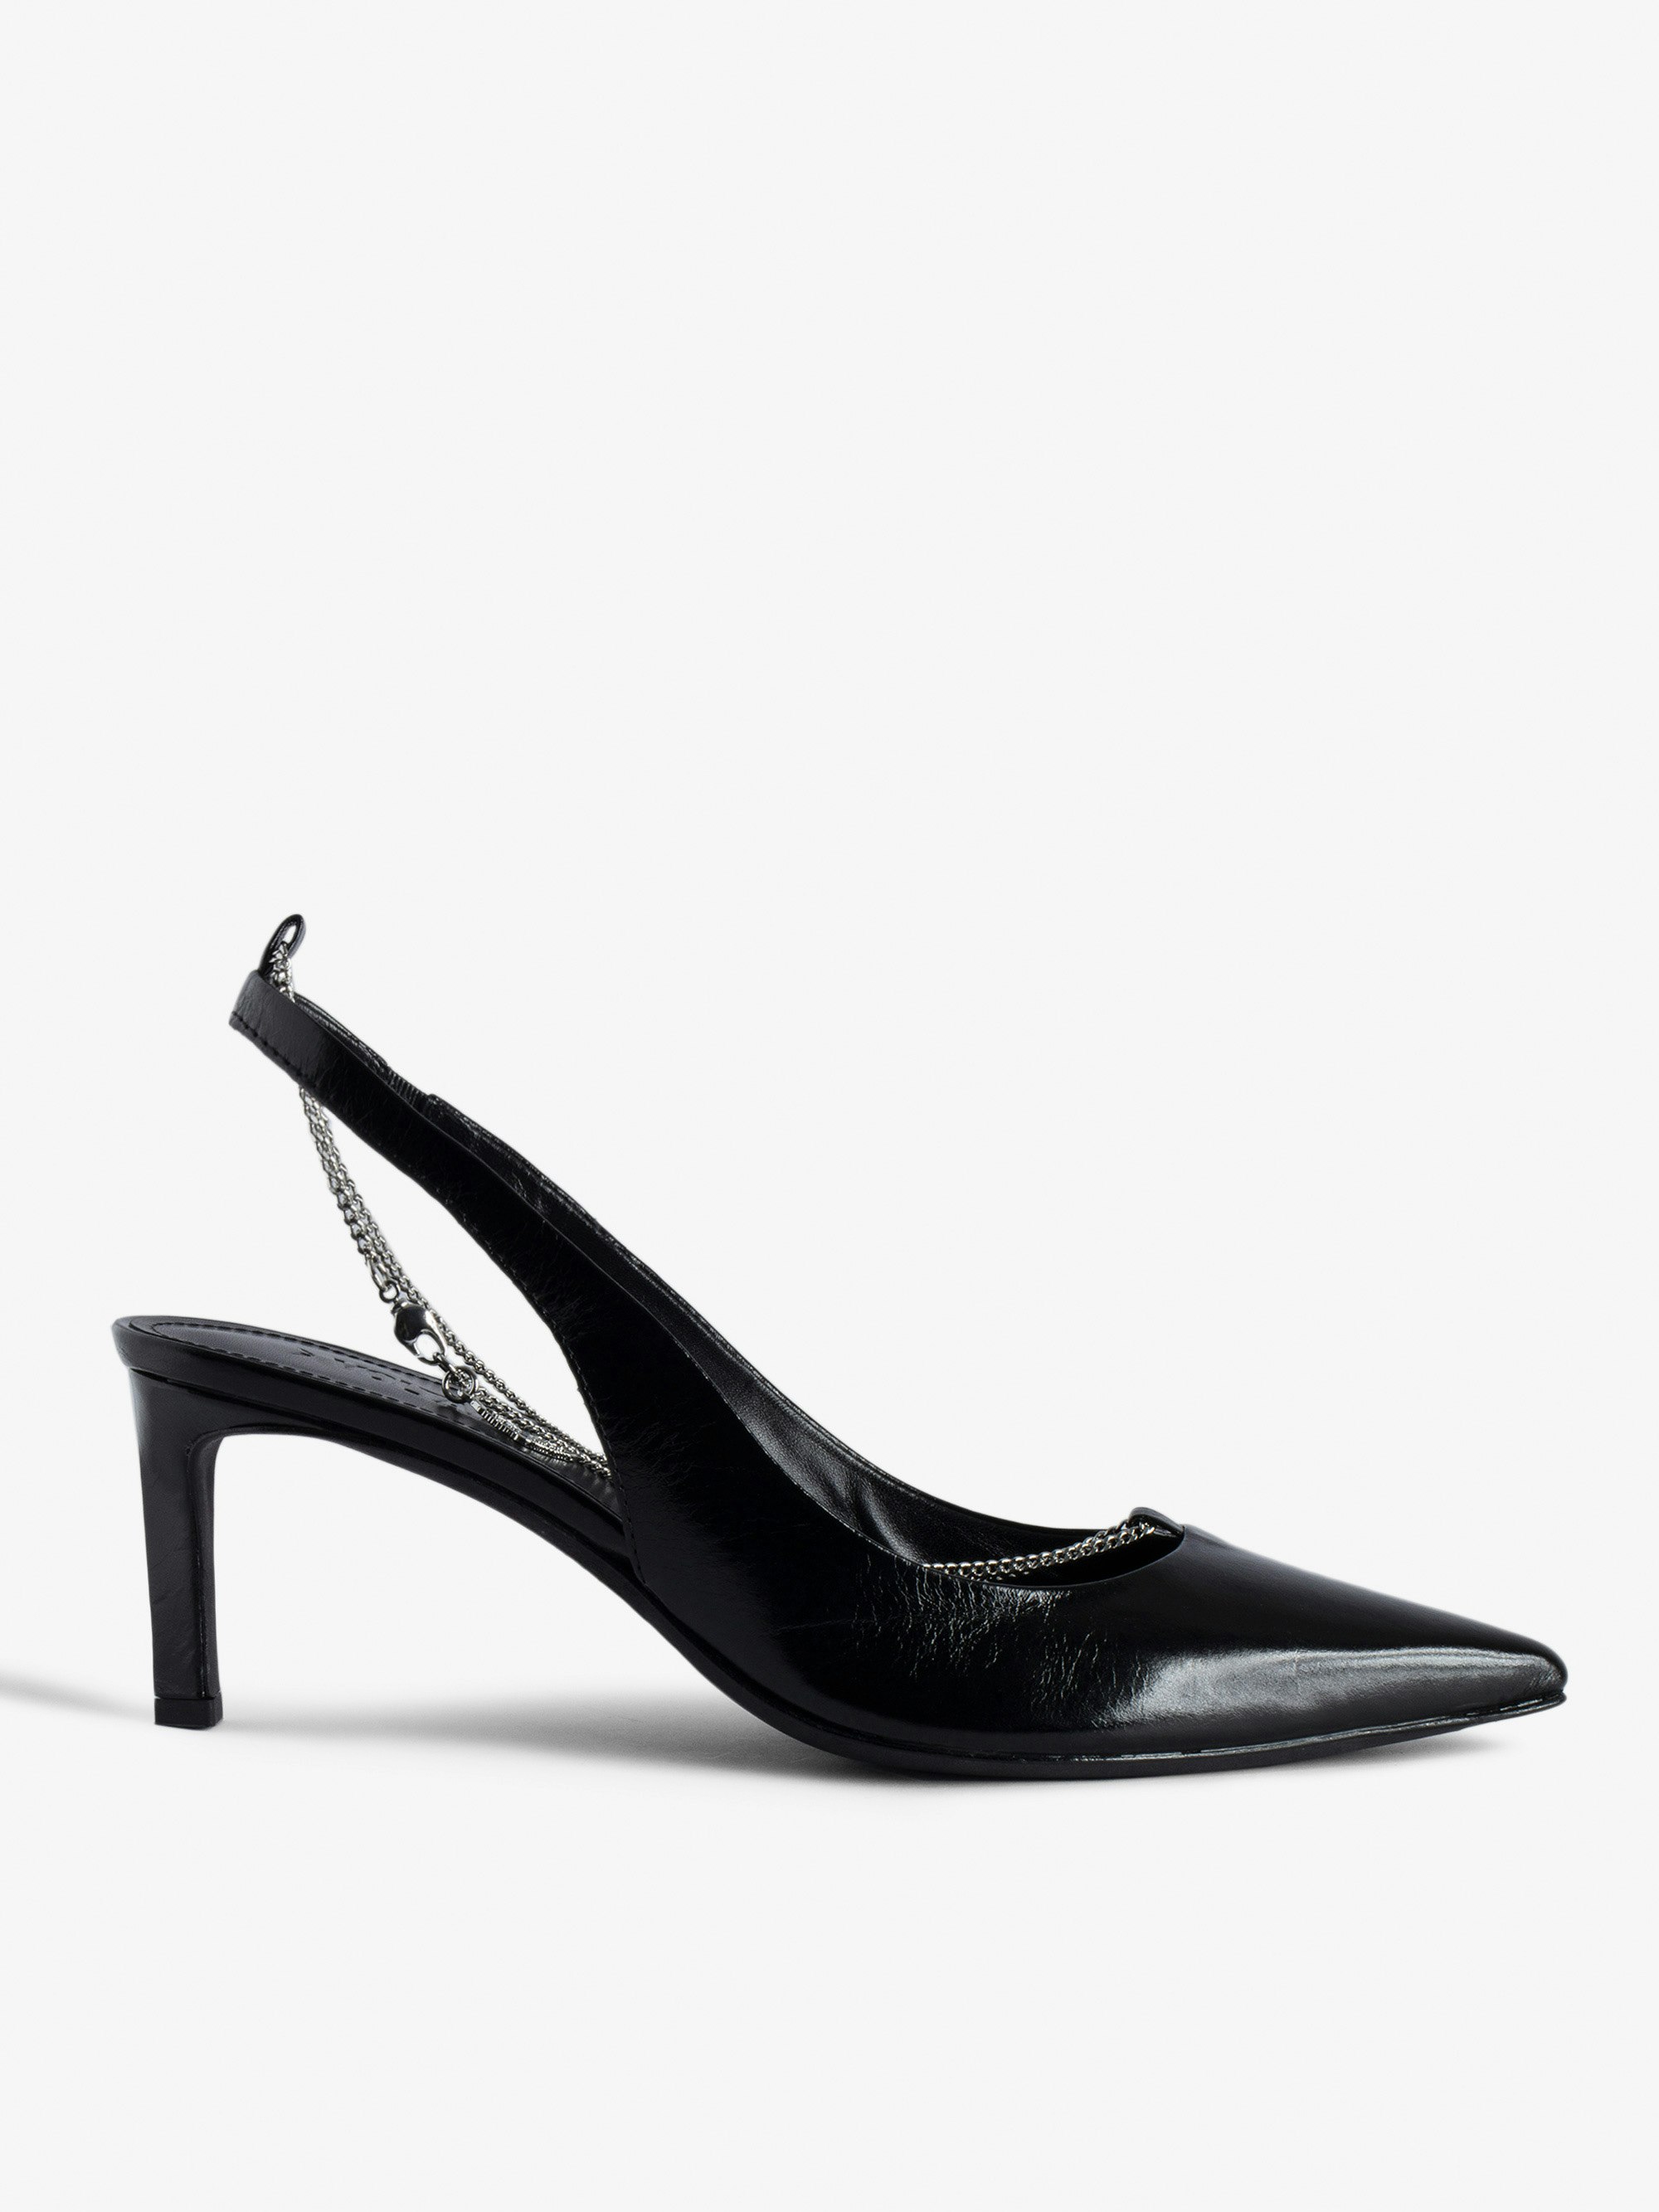 First Night Court Shoes - Black vintage-effect leather court shoes with leather strap and metal chain.